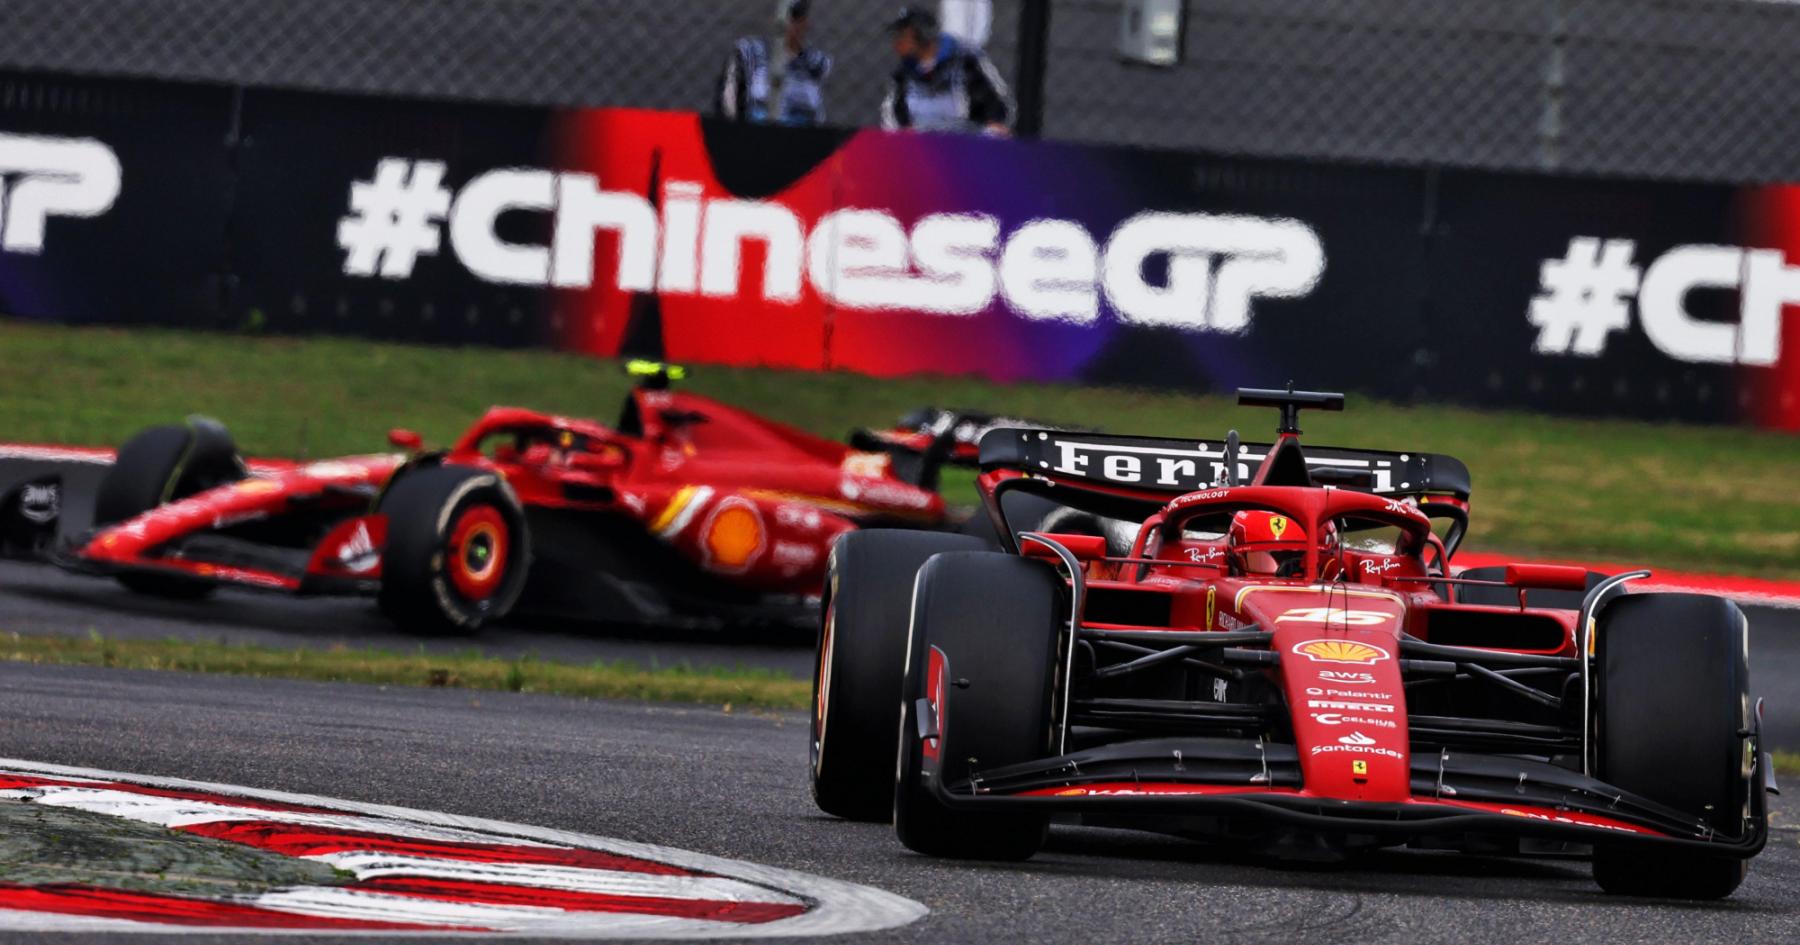 ferrari-matches-big-red-bull-deal-with-new-title-sponsor